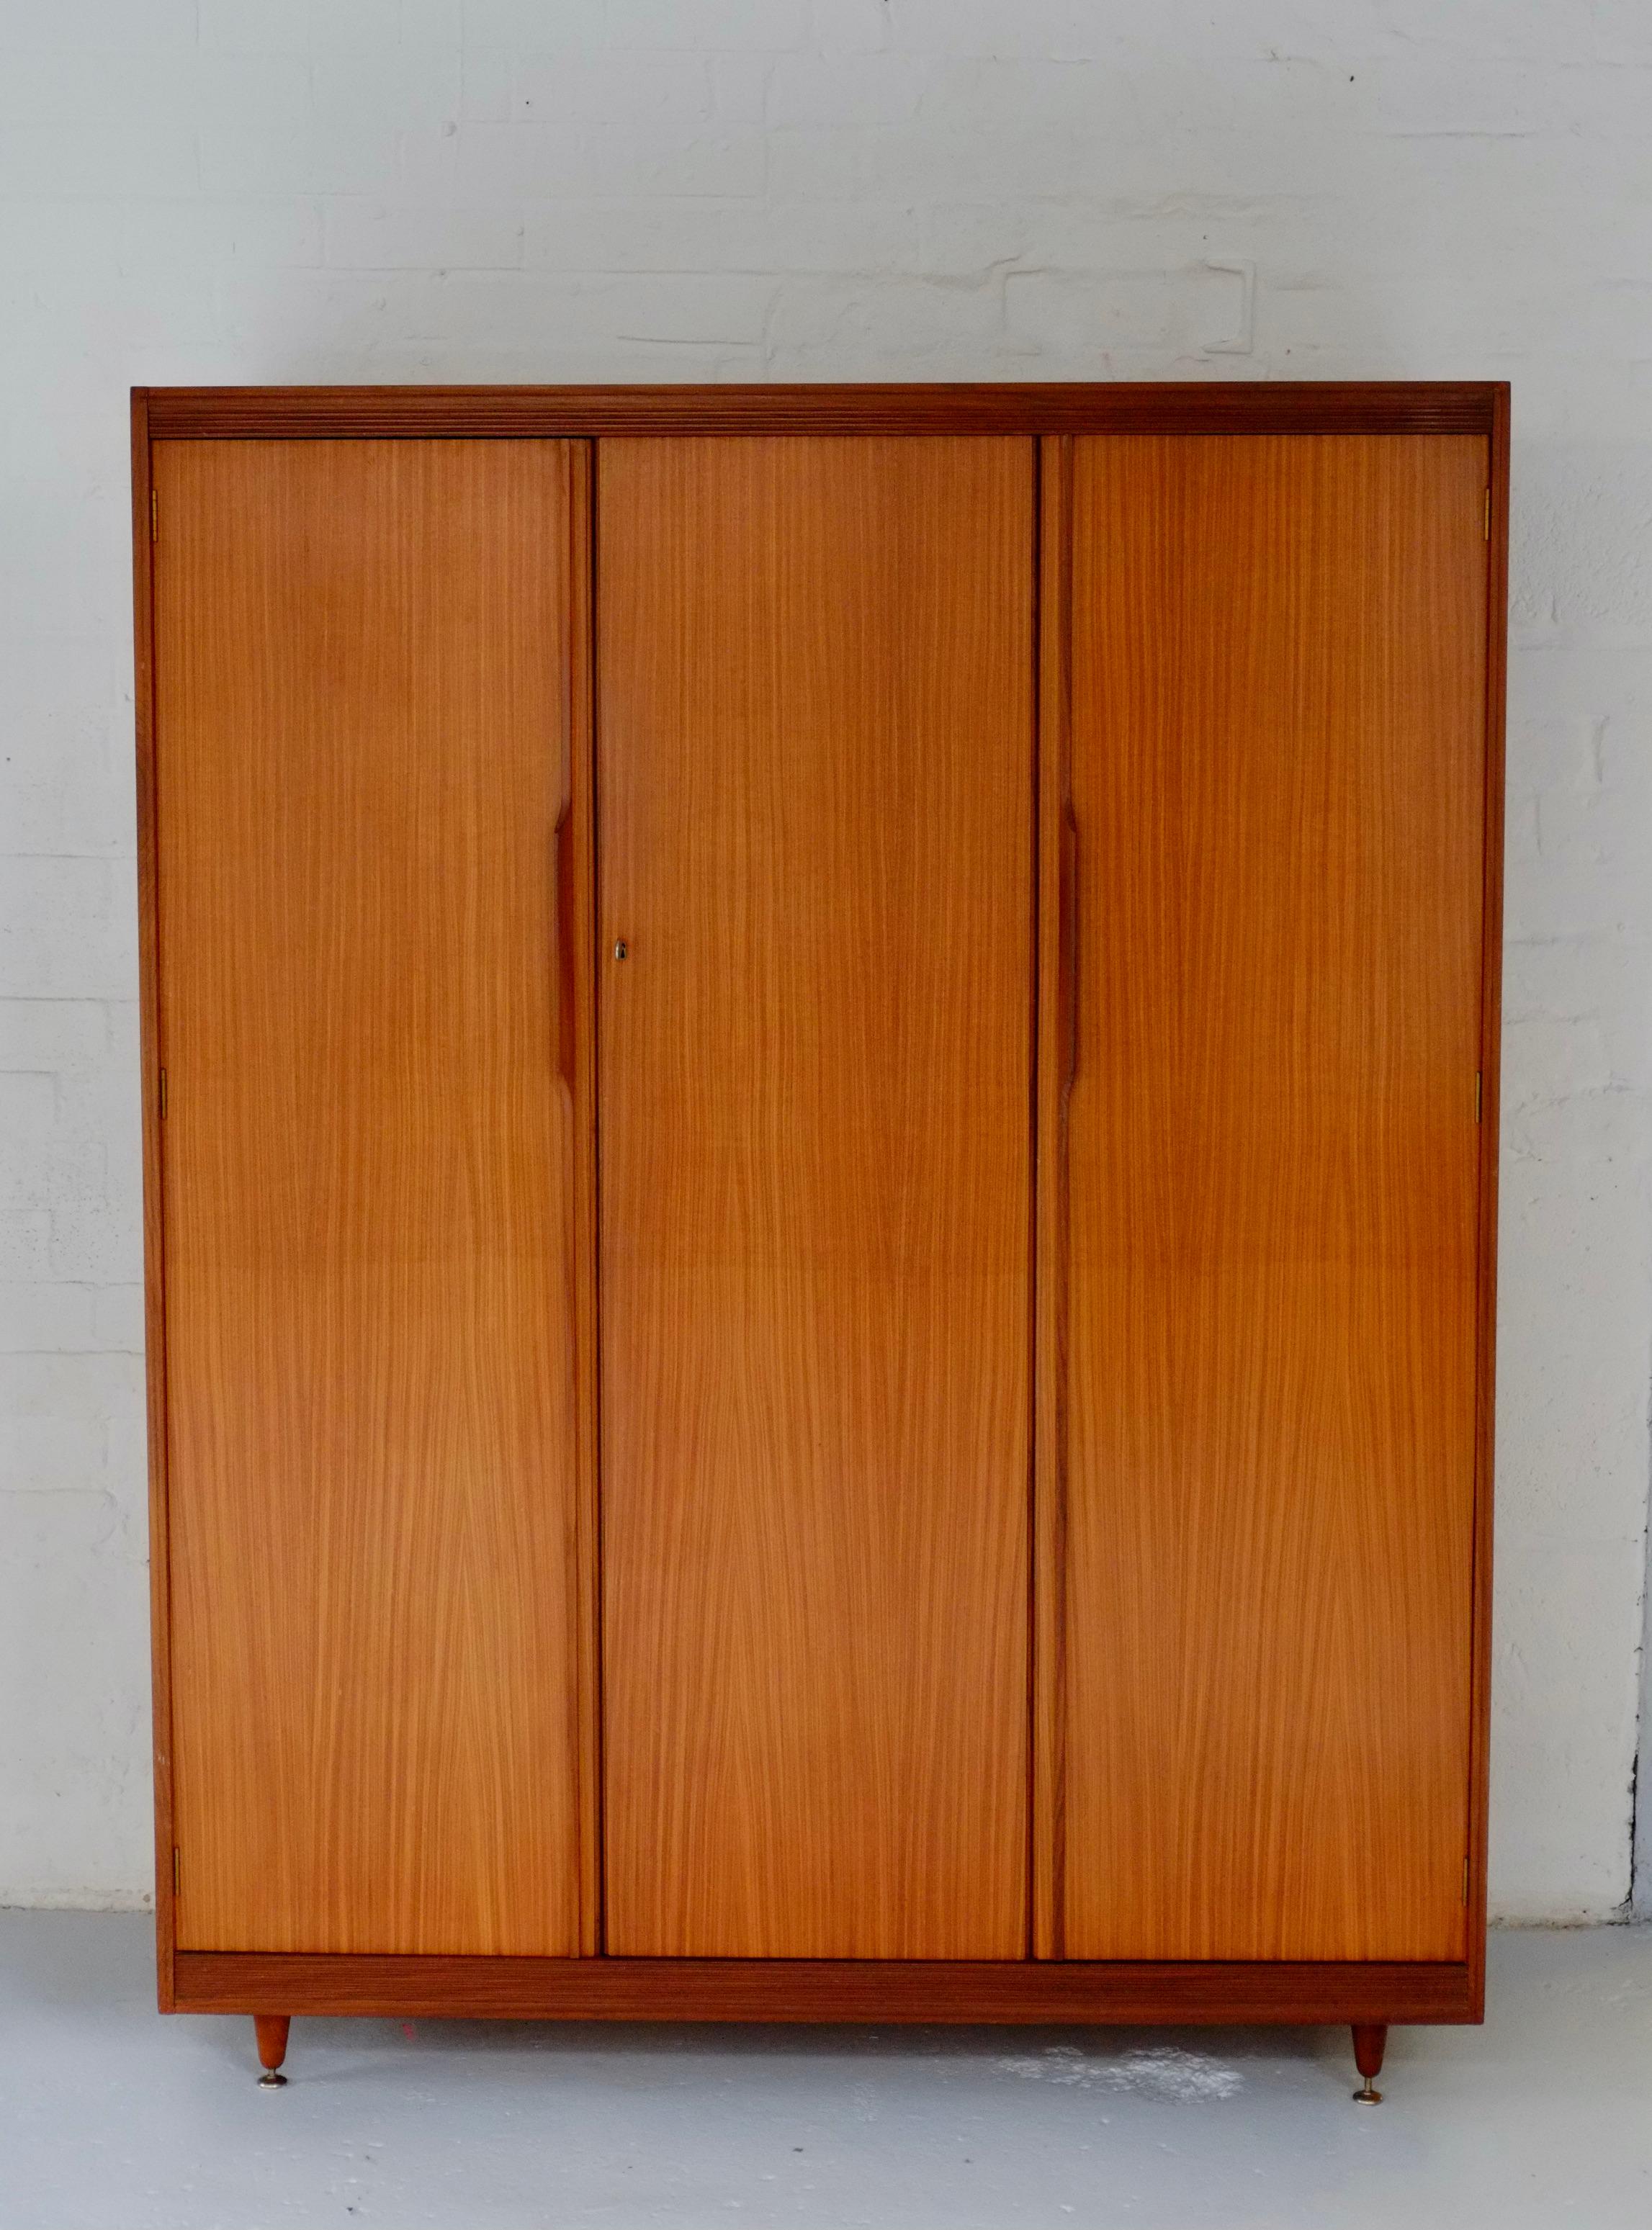 A beautiful large mid century wardrobe by Arthur Edwards for White and Newton. England C1960. The matching dressing table is featured in the 1961 book Contemporary Design in Woodwork. 

This piece is beautifully made in two tones of wood - I think